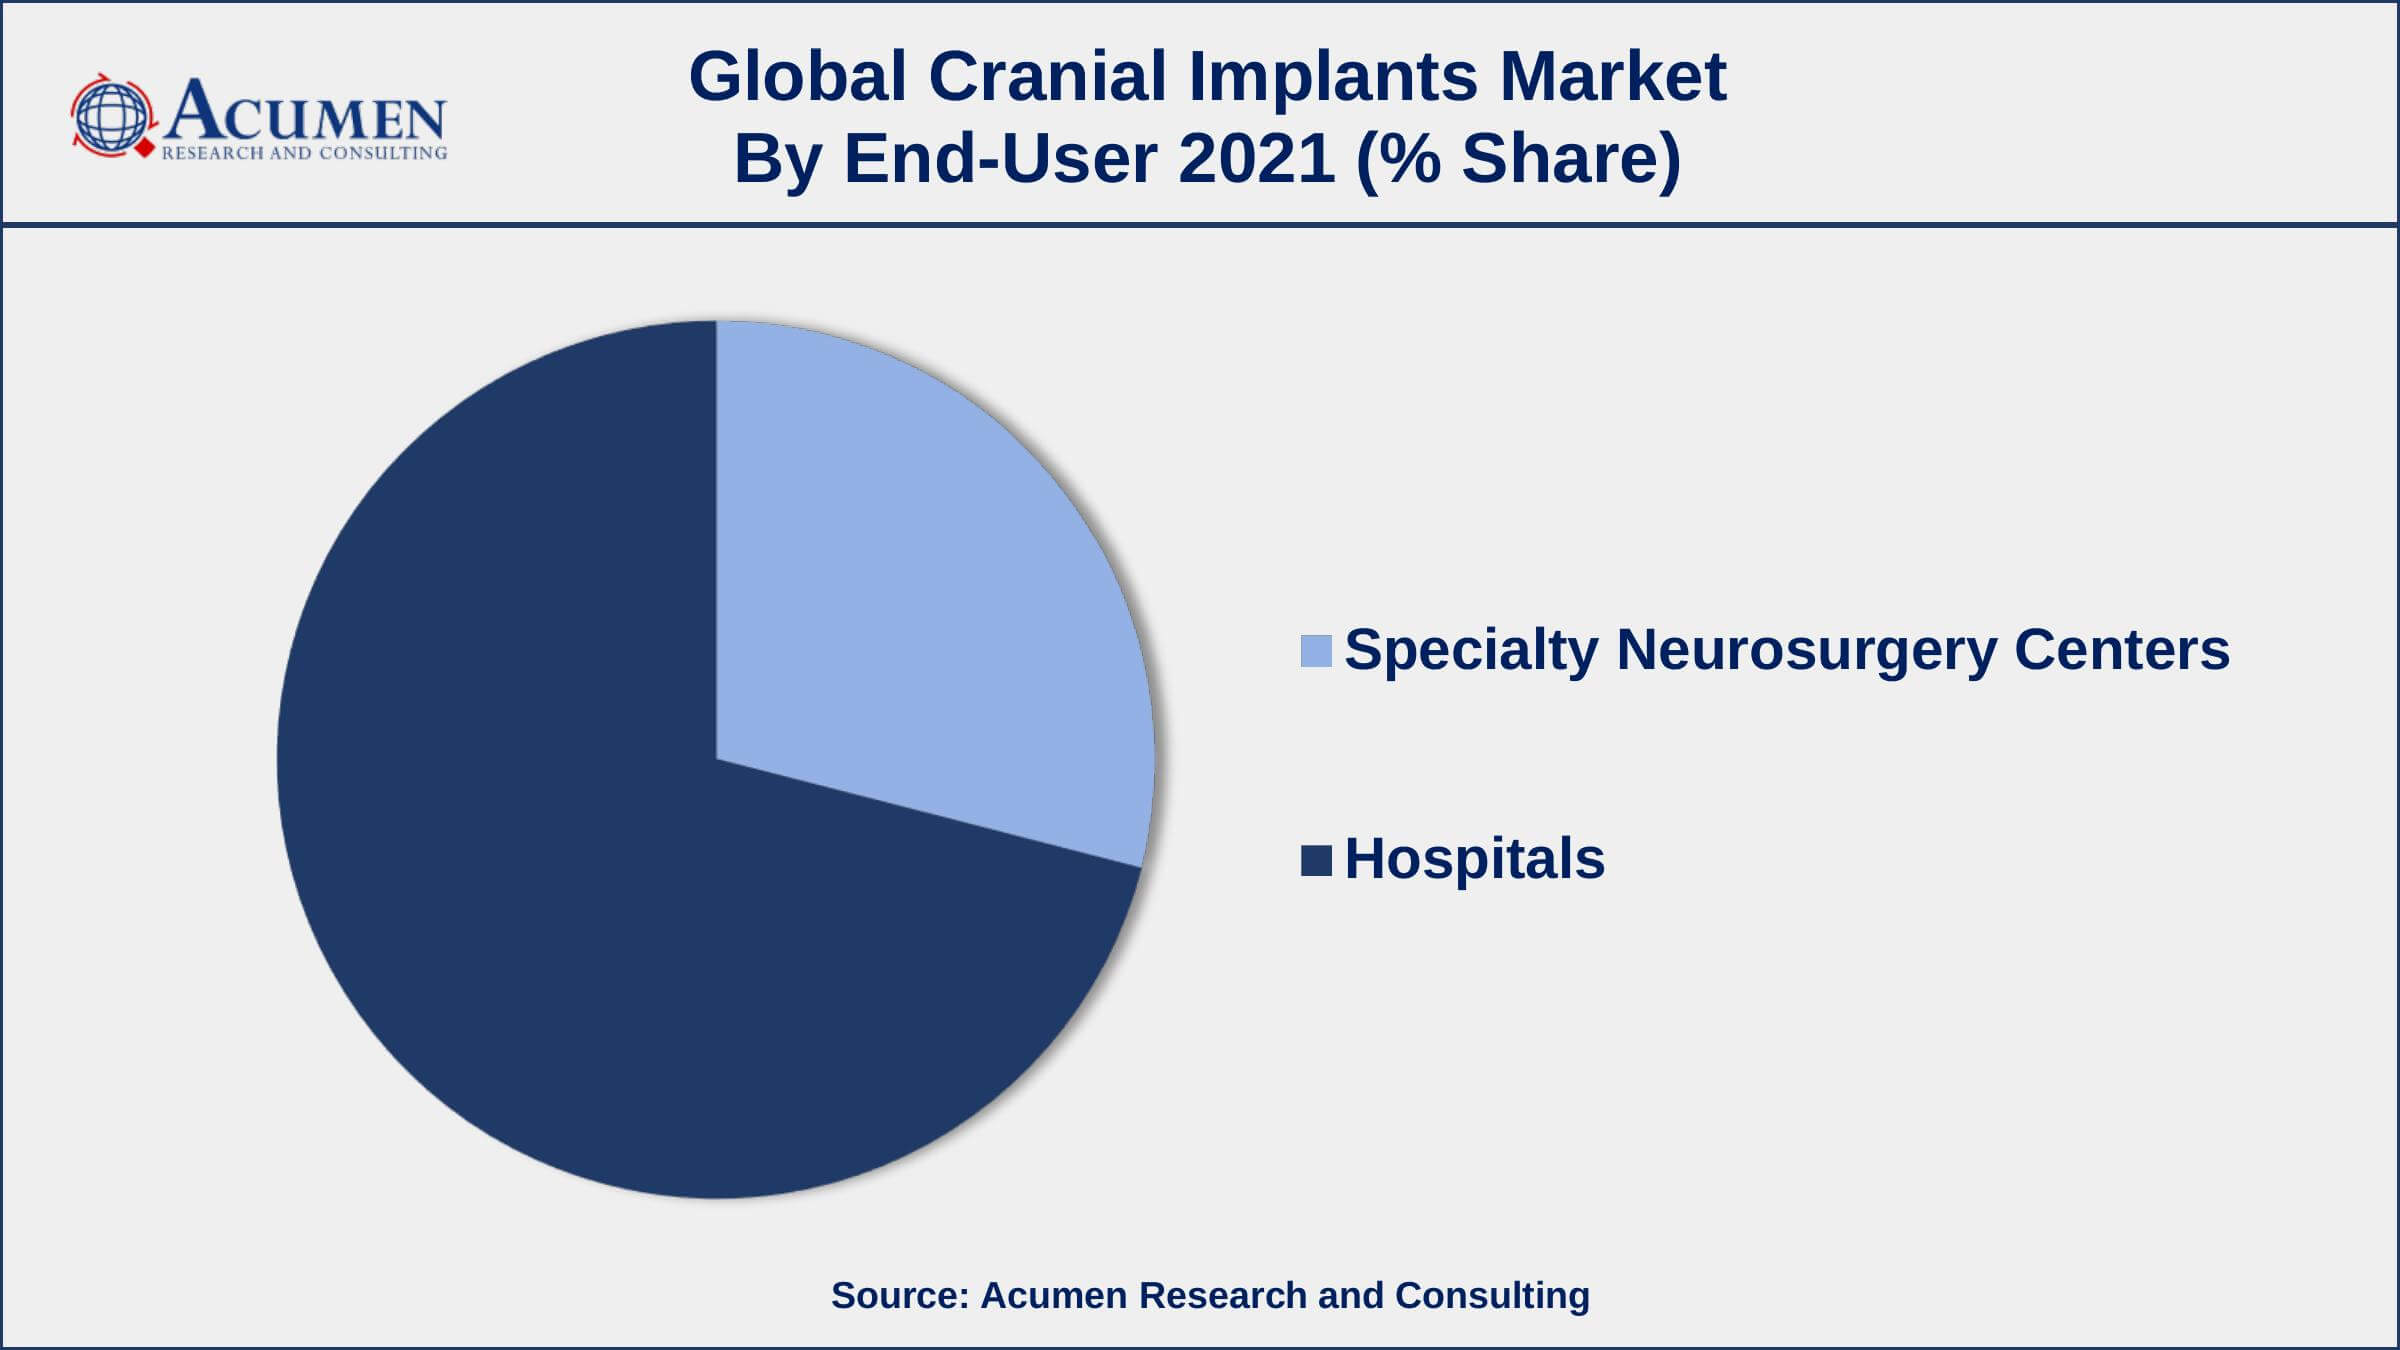 Among end-user, neurosurgical centers segment is growing at a strongest CAGR over the forecast period